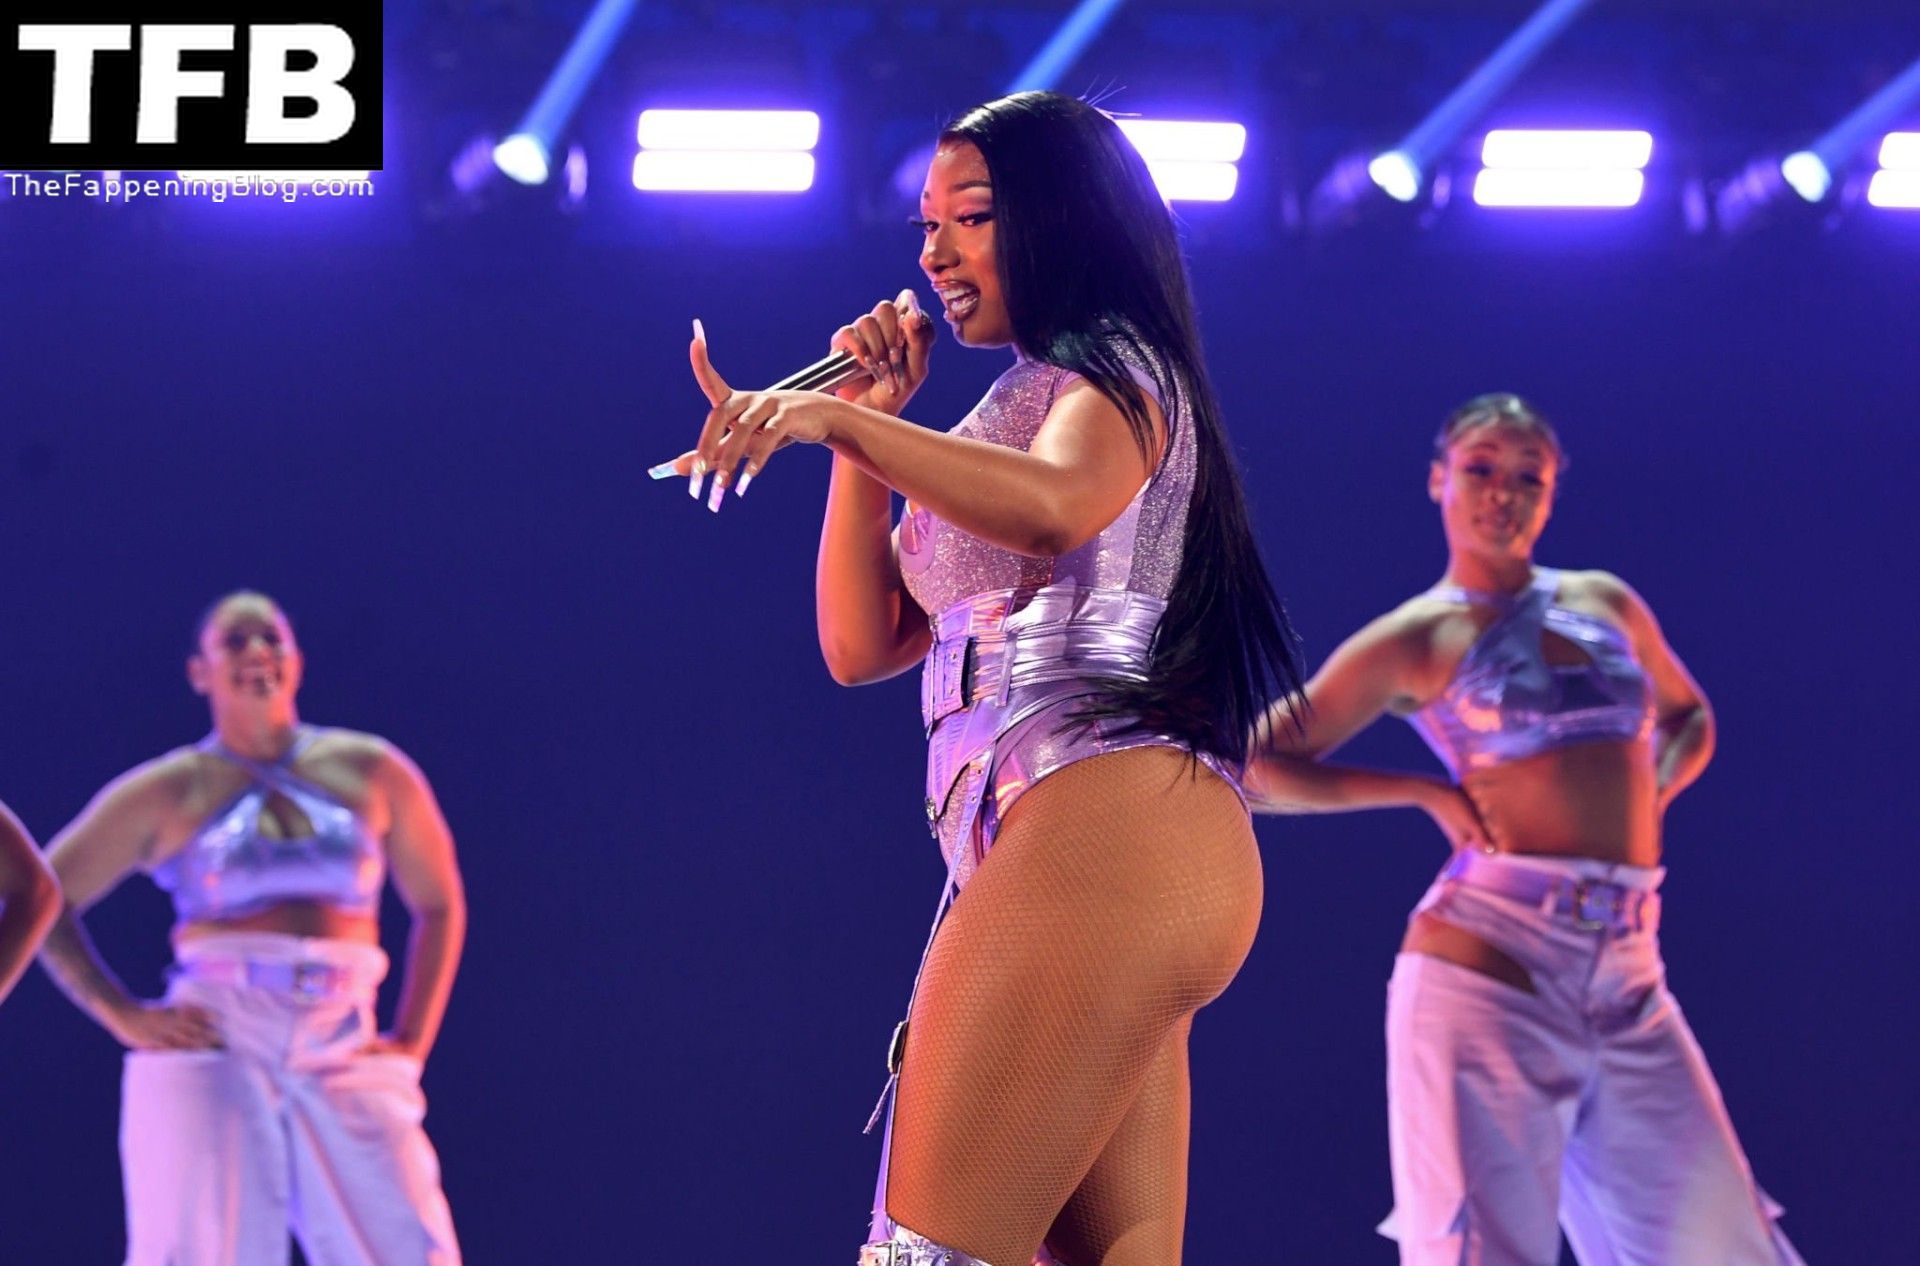 Megan Thee Stallion Showcases Her Big Boobs on Stage at the 2022 iHeartRadio Music Festival in Las Vegas (32 Photos)